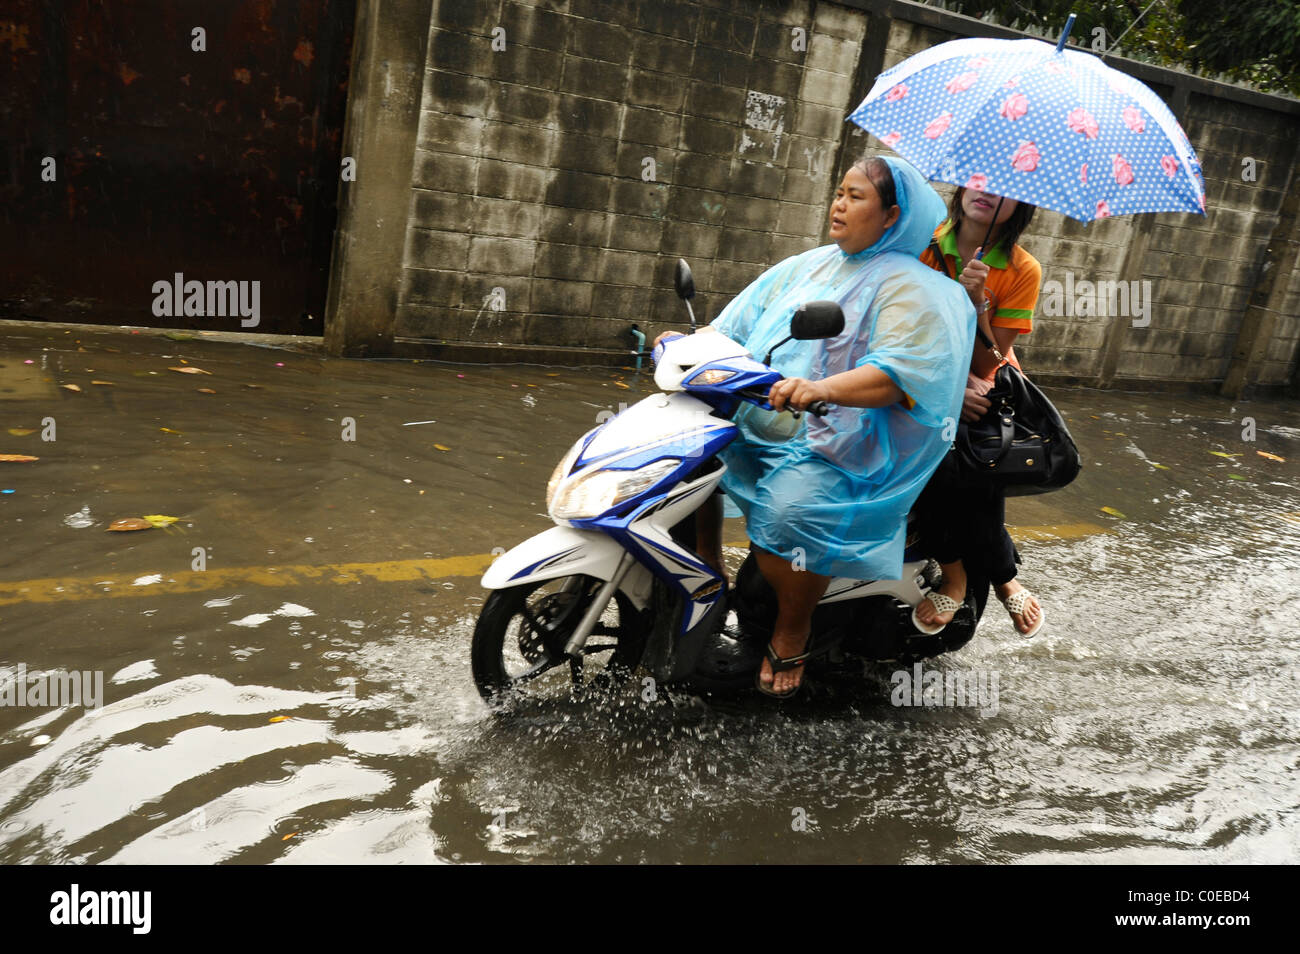 a rainy day in bangkok ( crazy flooded street), everyday life in the big mango, strange weather situation Stock Photo